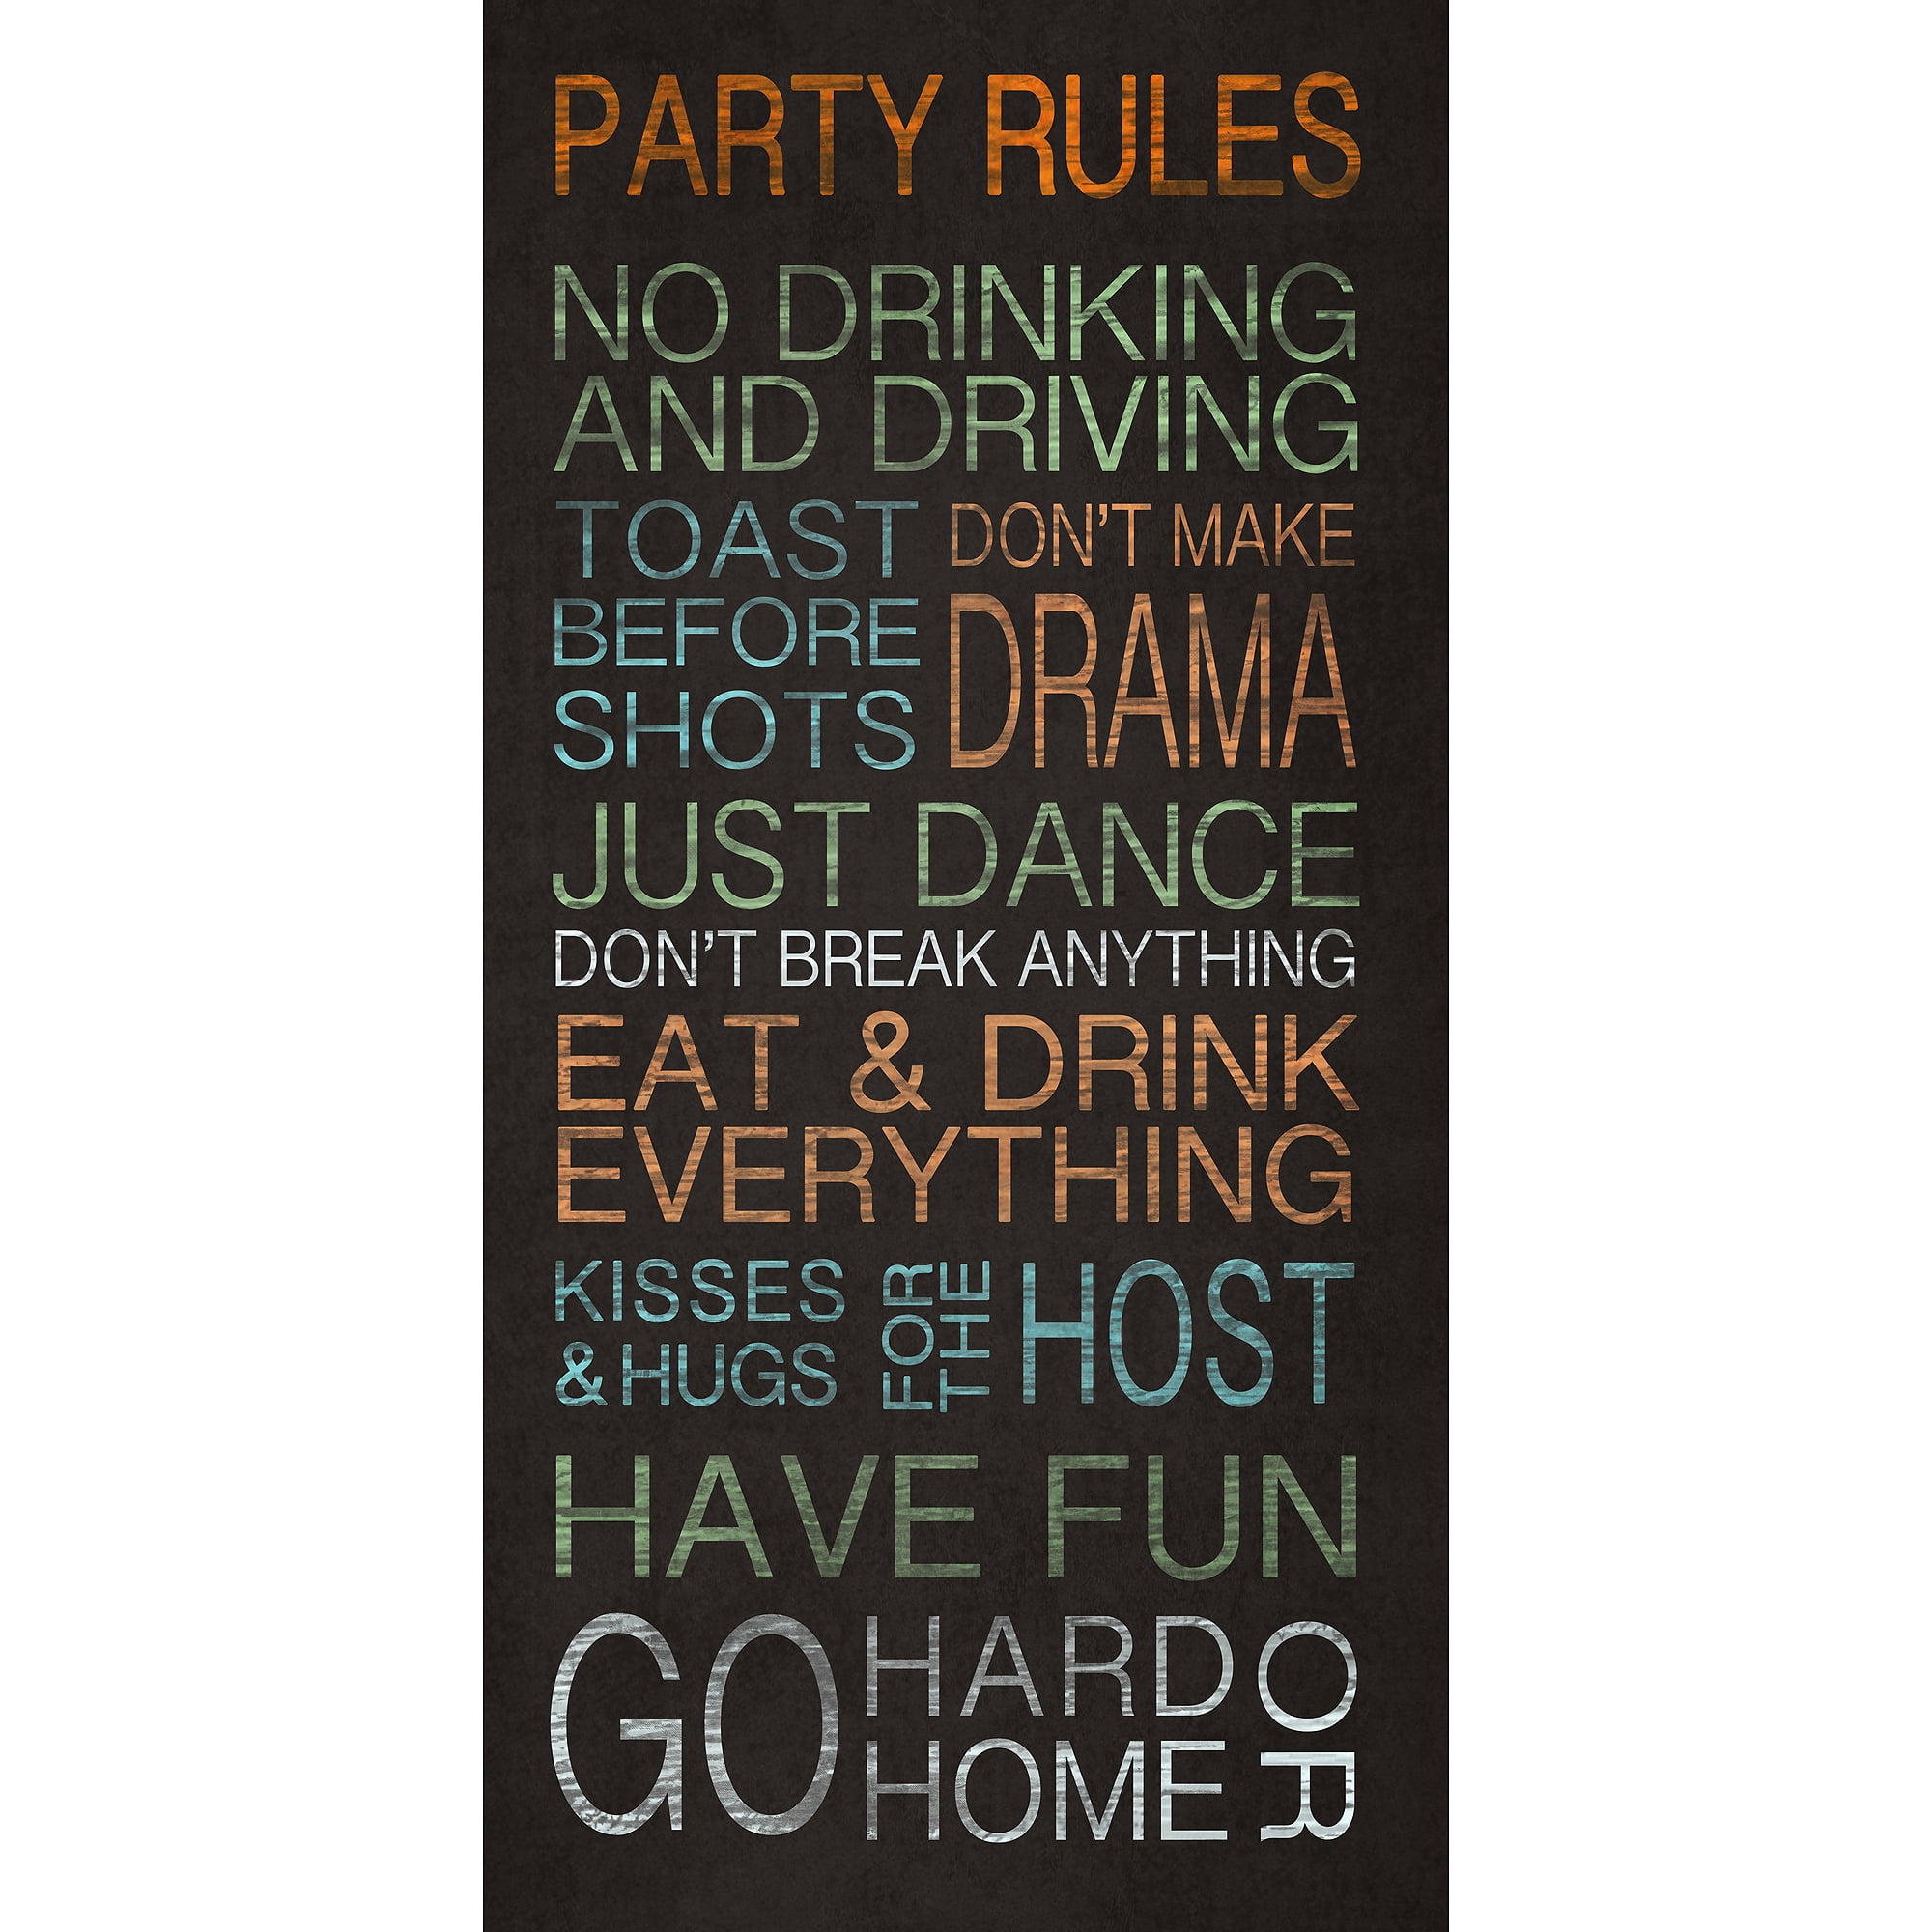 presentation party rules